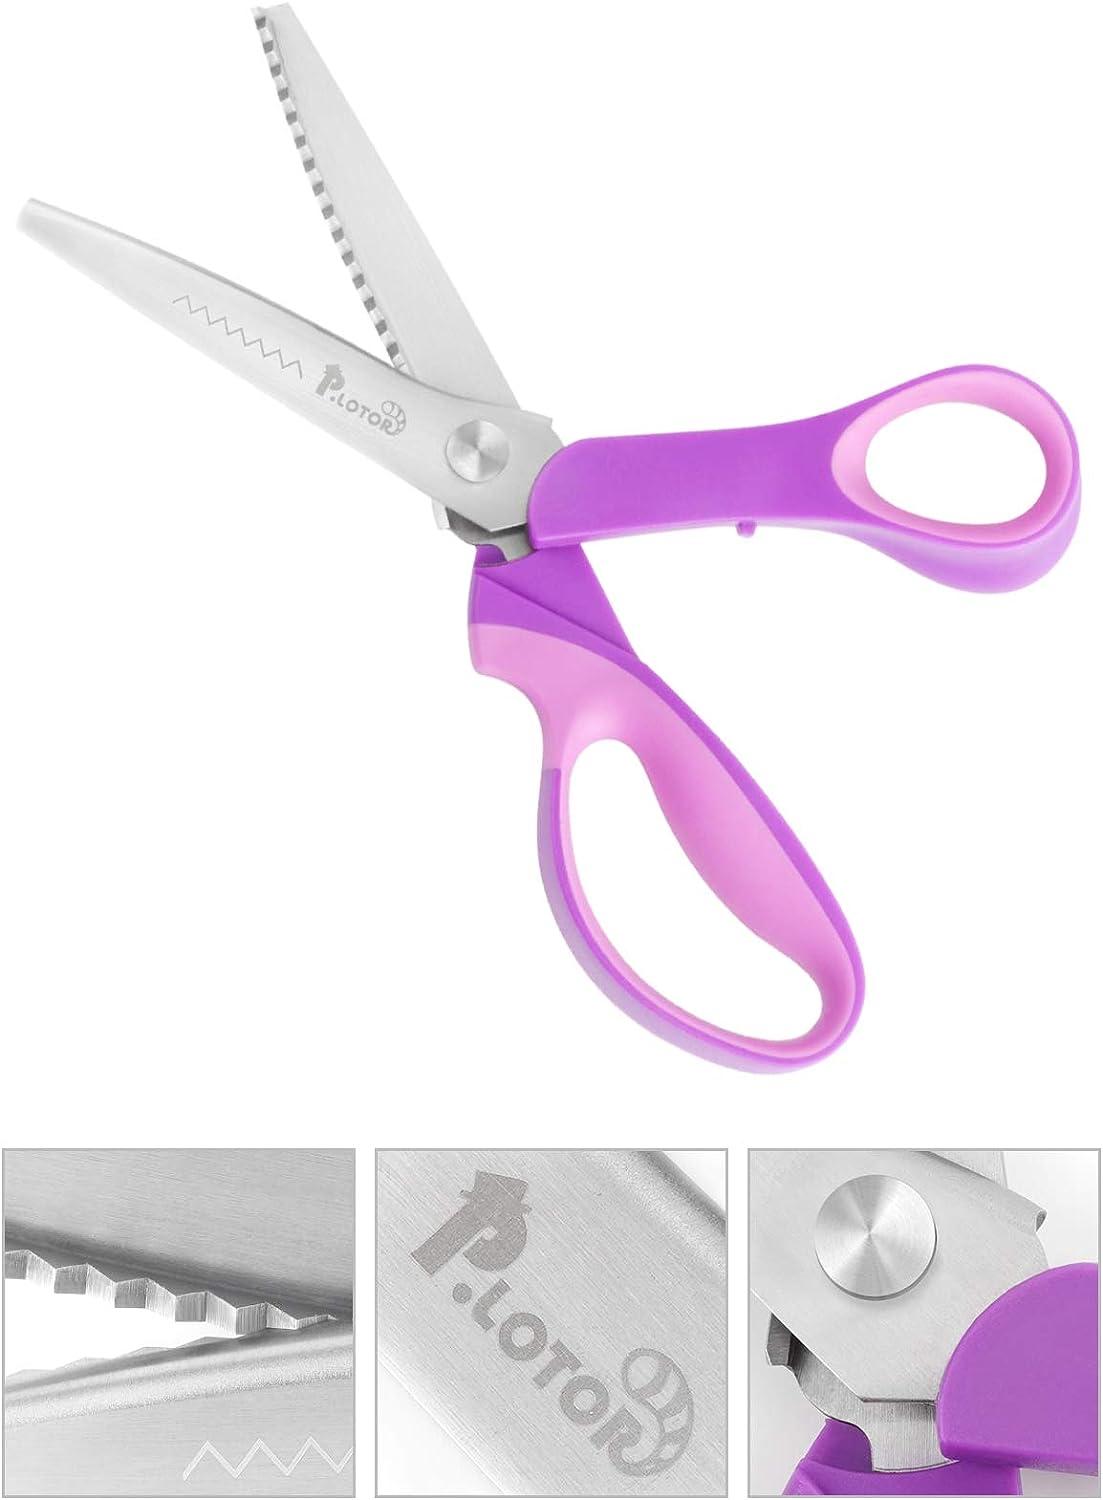 Pinking Shears Scissors for Fabric, Paper, Ribbon